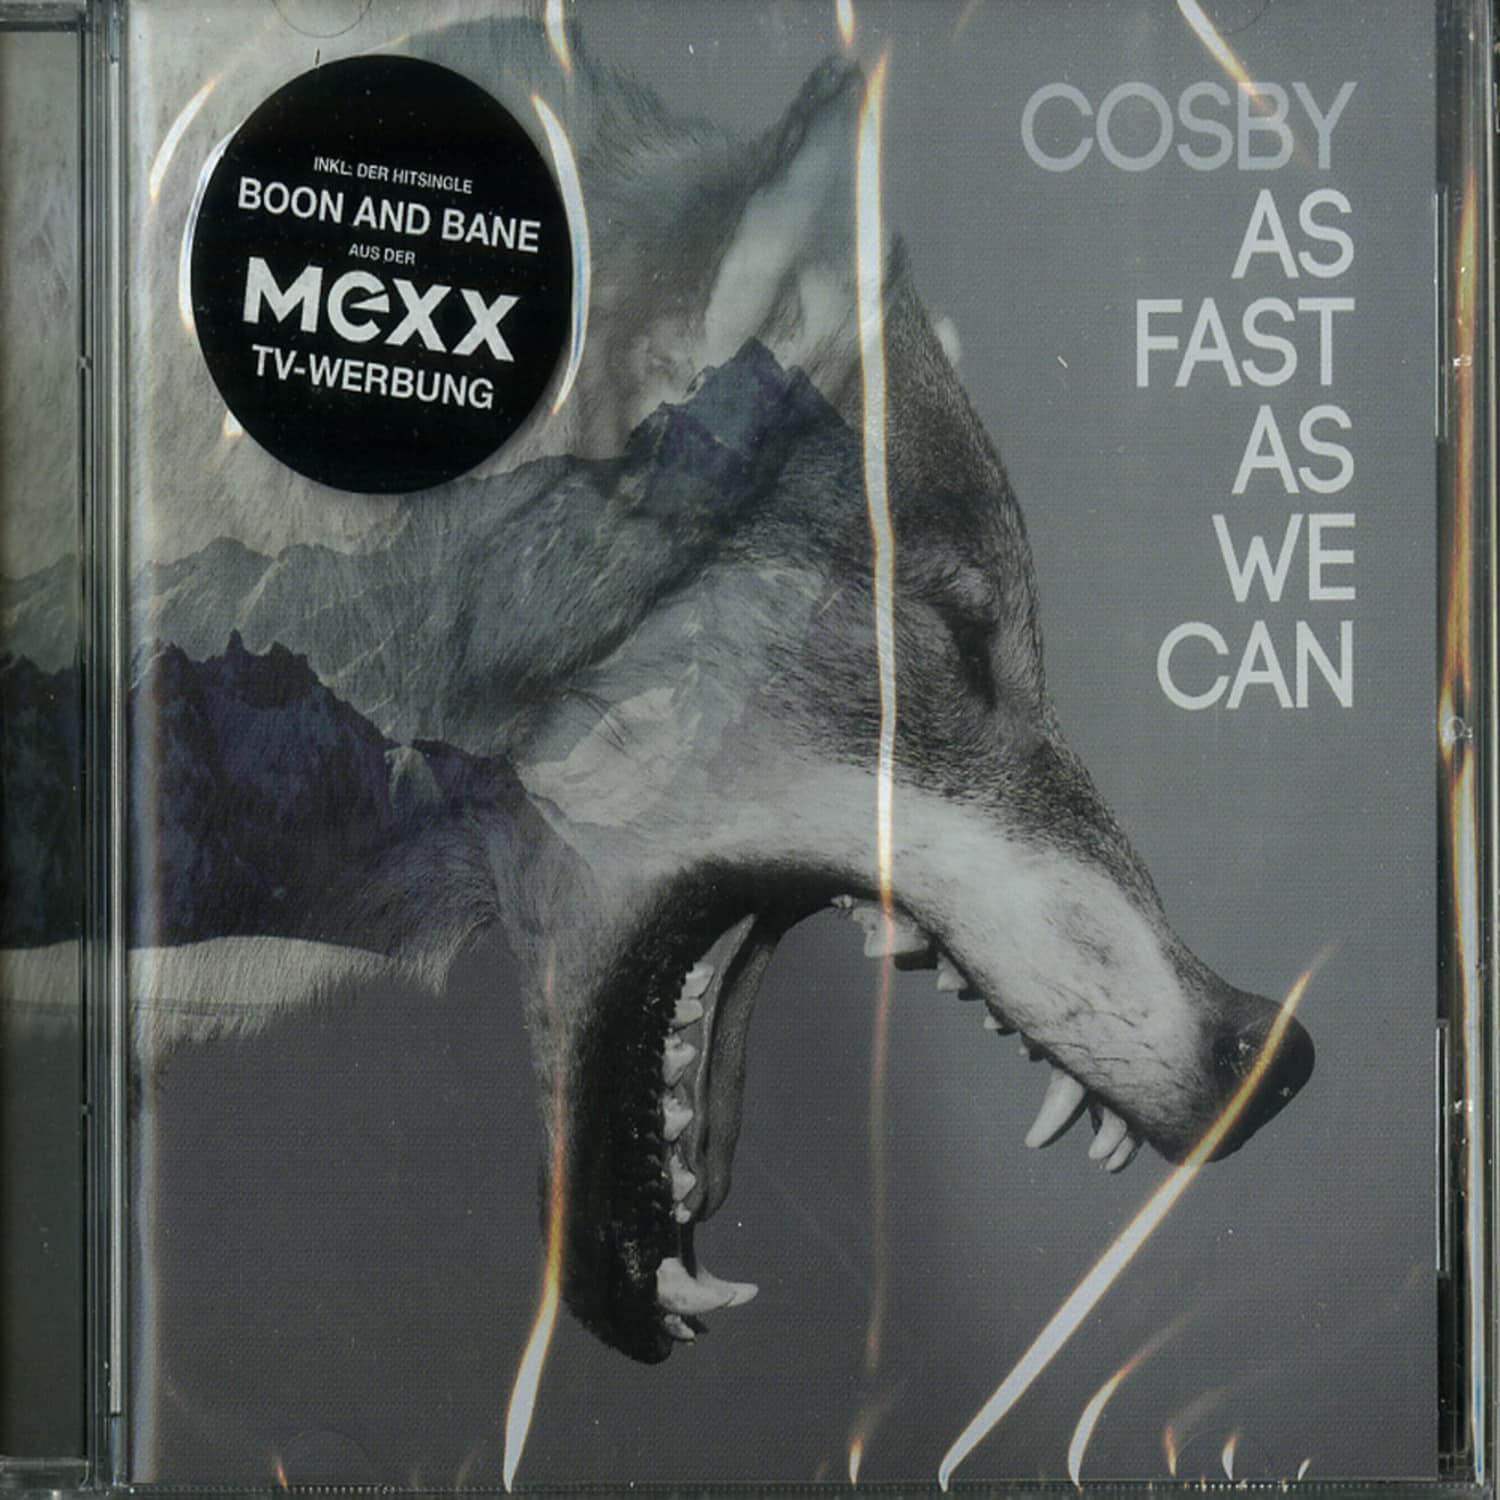 Cosby - AS FAST AS WE CAN 